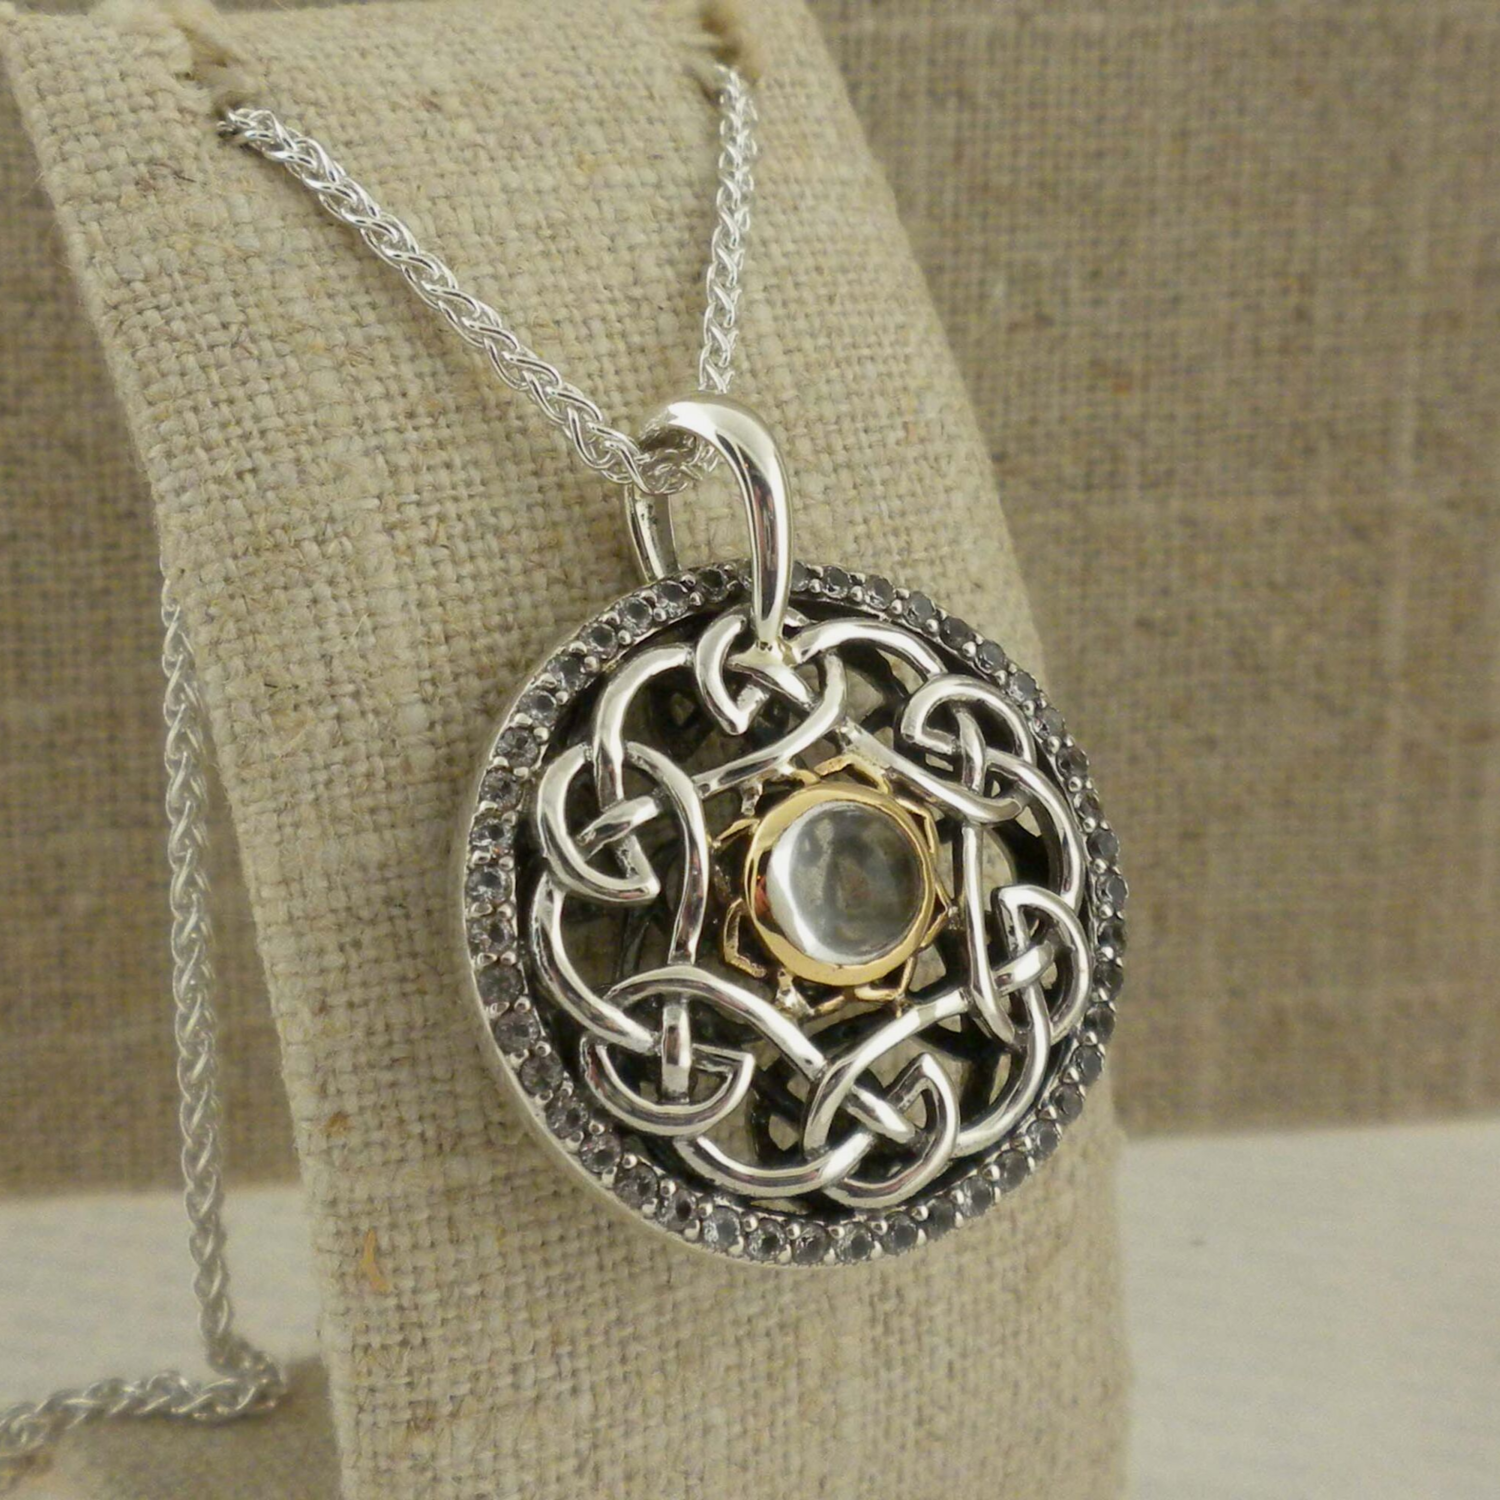 Tempest Celtic Pendant by Keith Jack